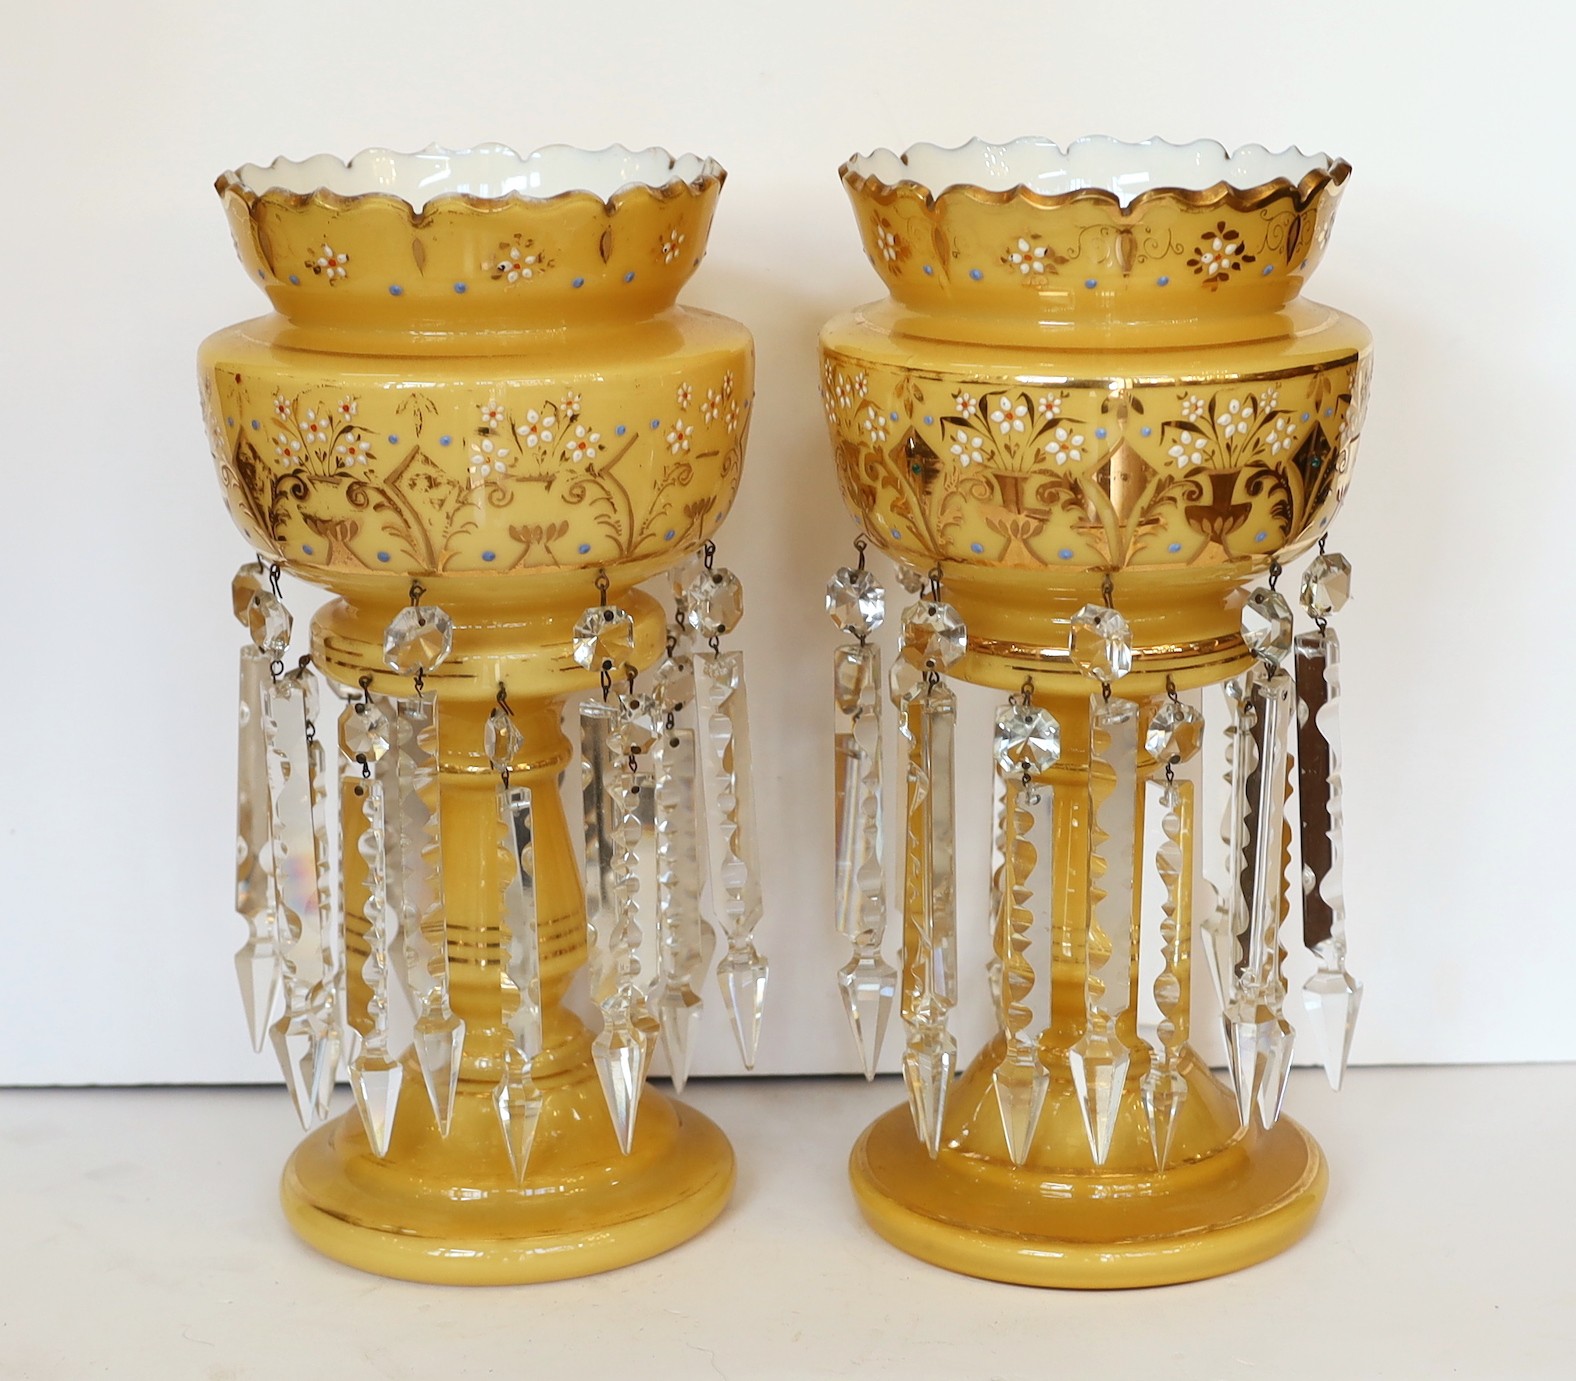 A pair of late 19th century Bohemian opaque glass lustres with enamelled and gilt floral decoration, - Image 2 of 3